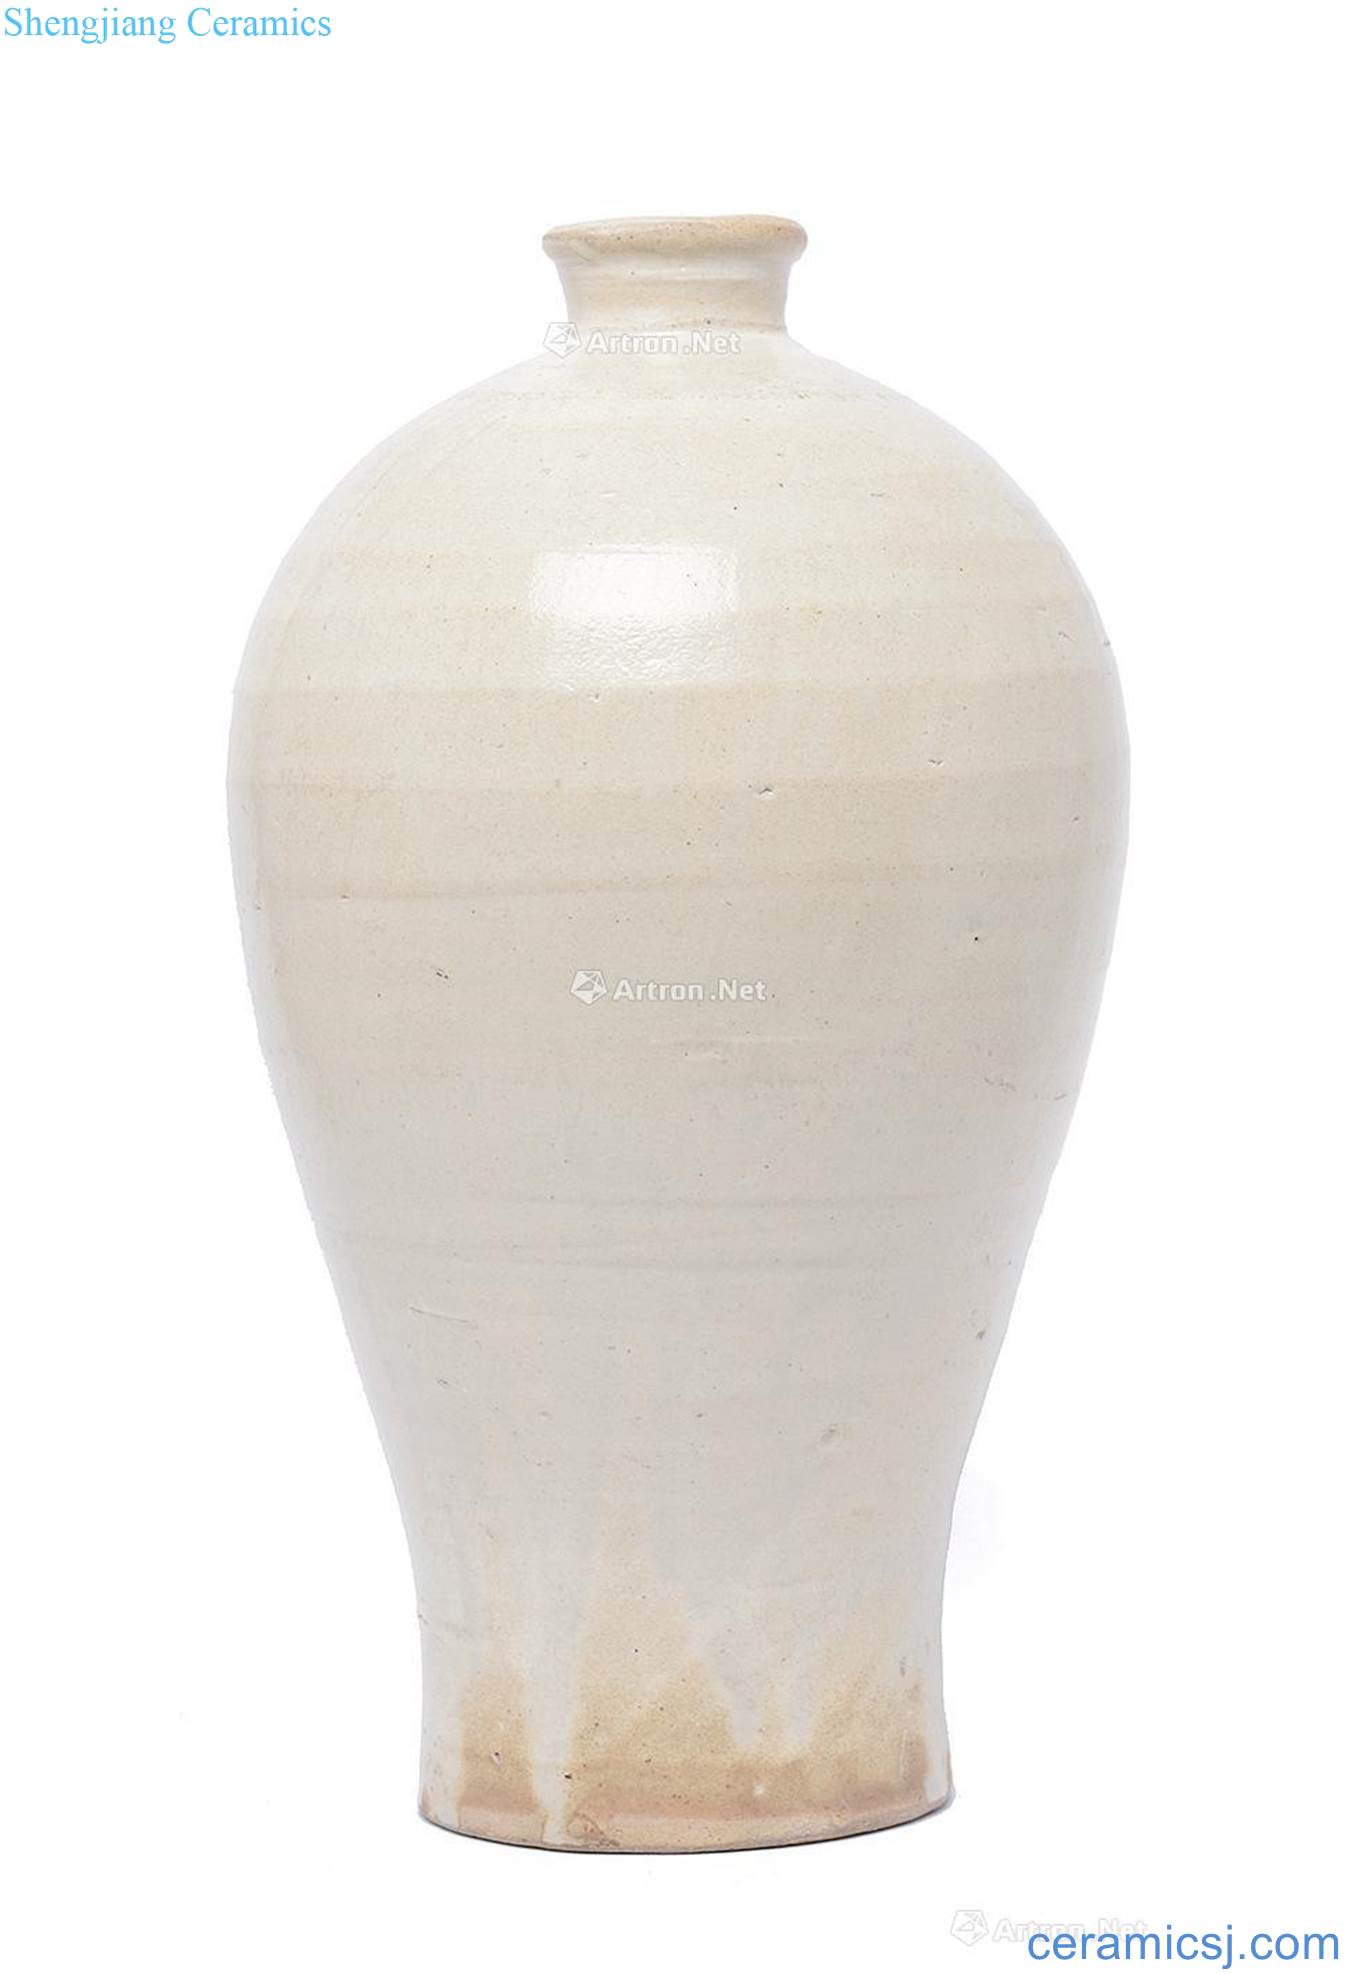 The song dynasty porcelain bottle may